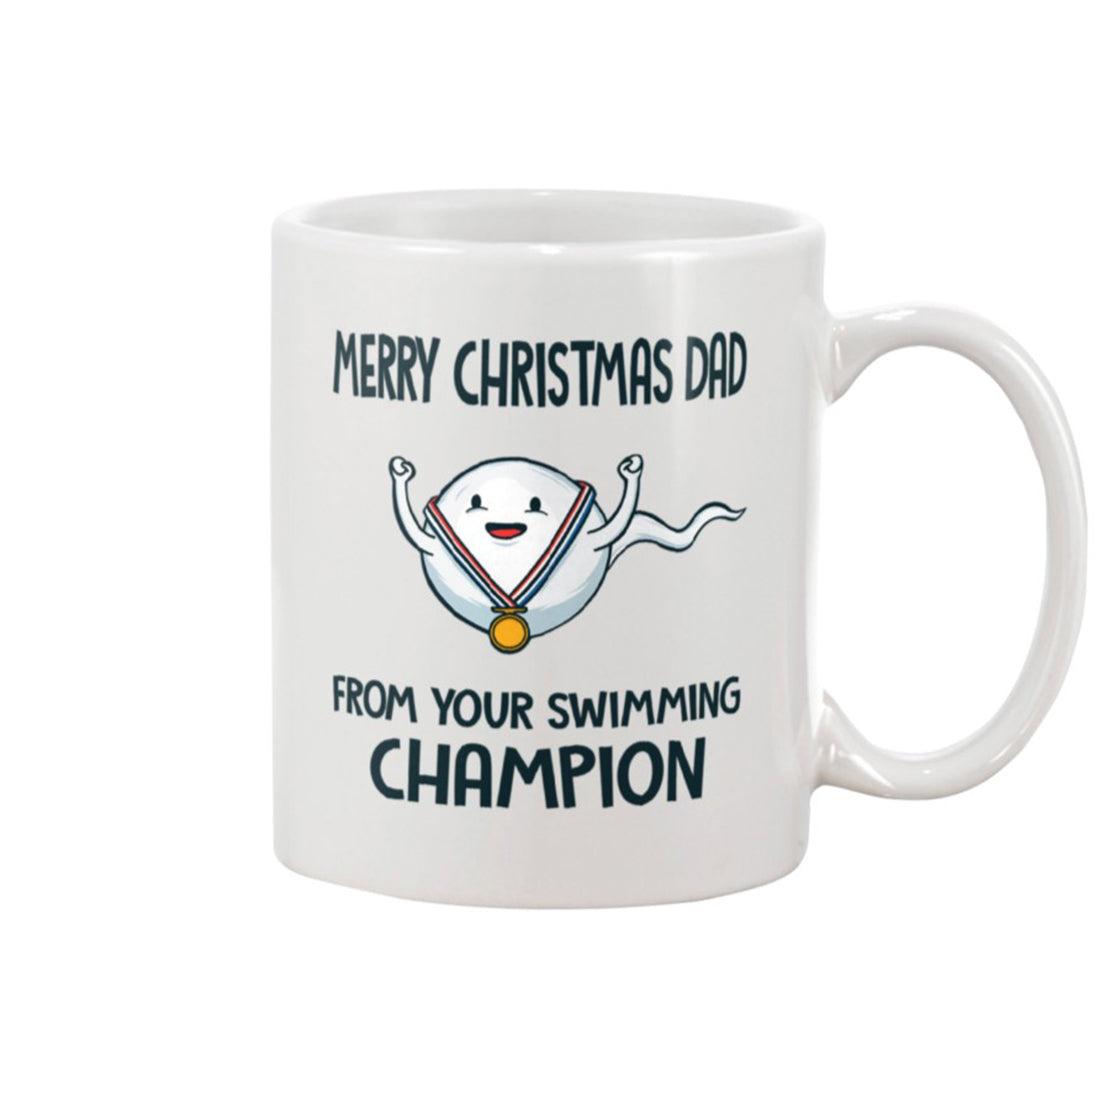 Mountaineer Synslinie Pounding Merry Christmas Dad From Your Swimming Champion Mug Funny Gift For Fat -  Family Panda - Unique gifting for family bonding